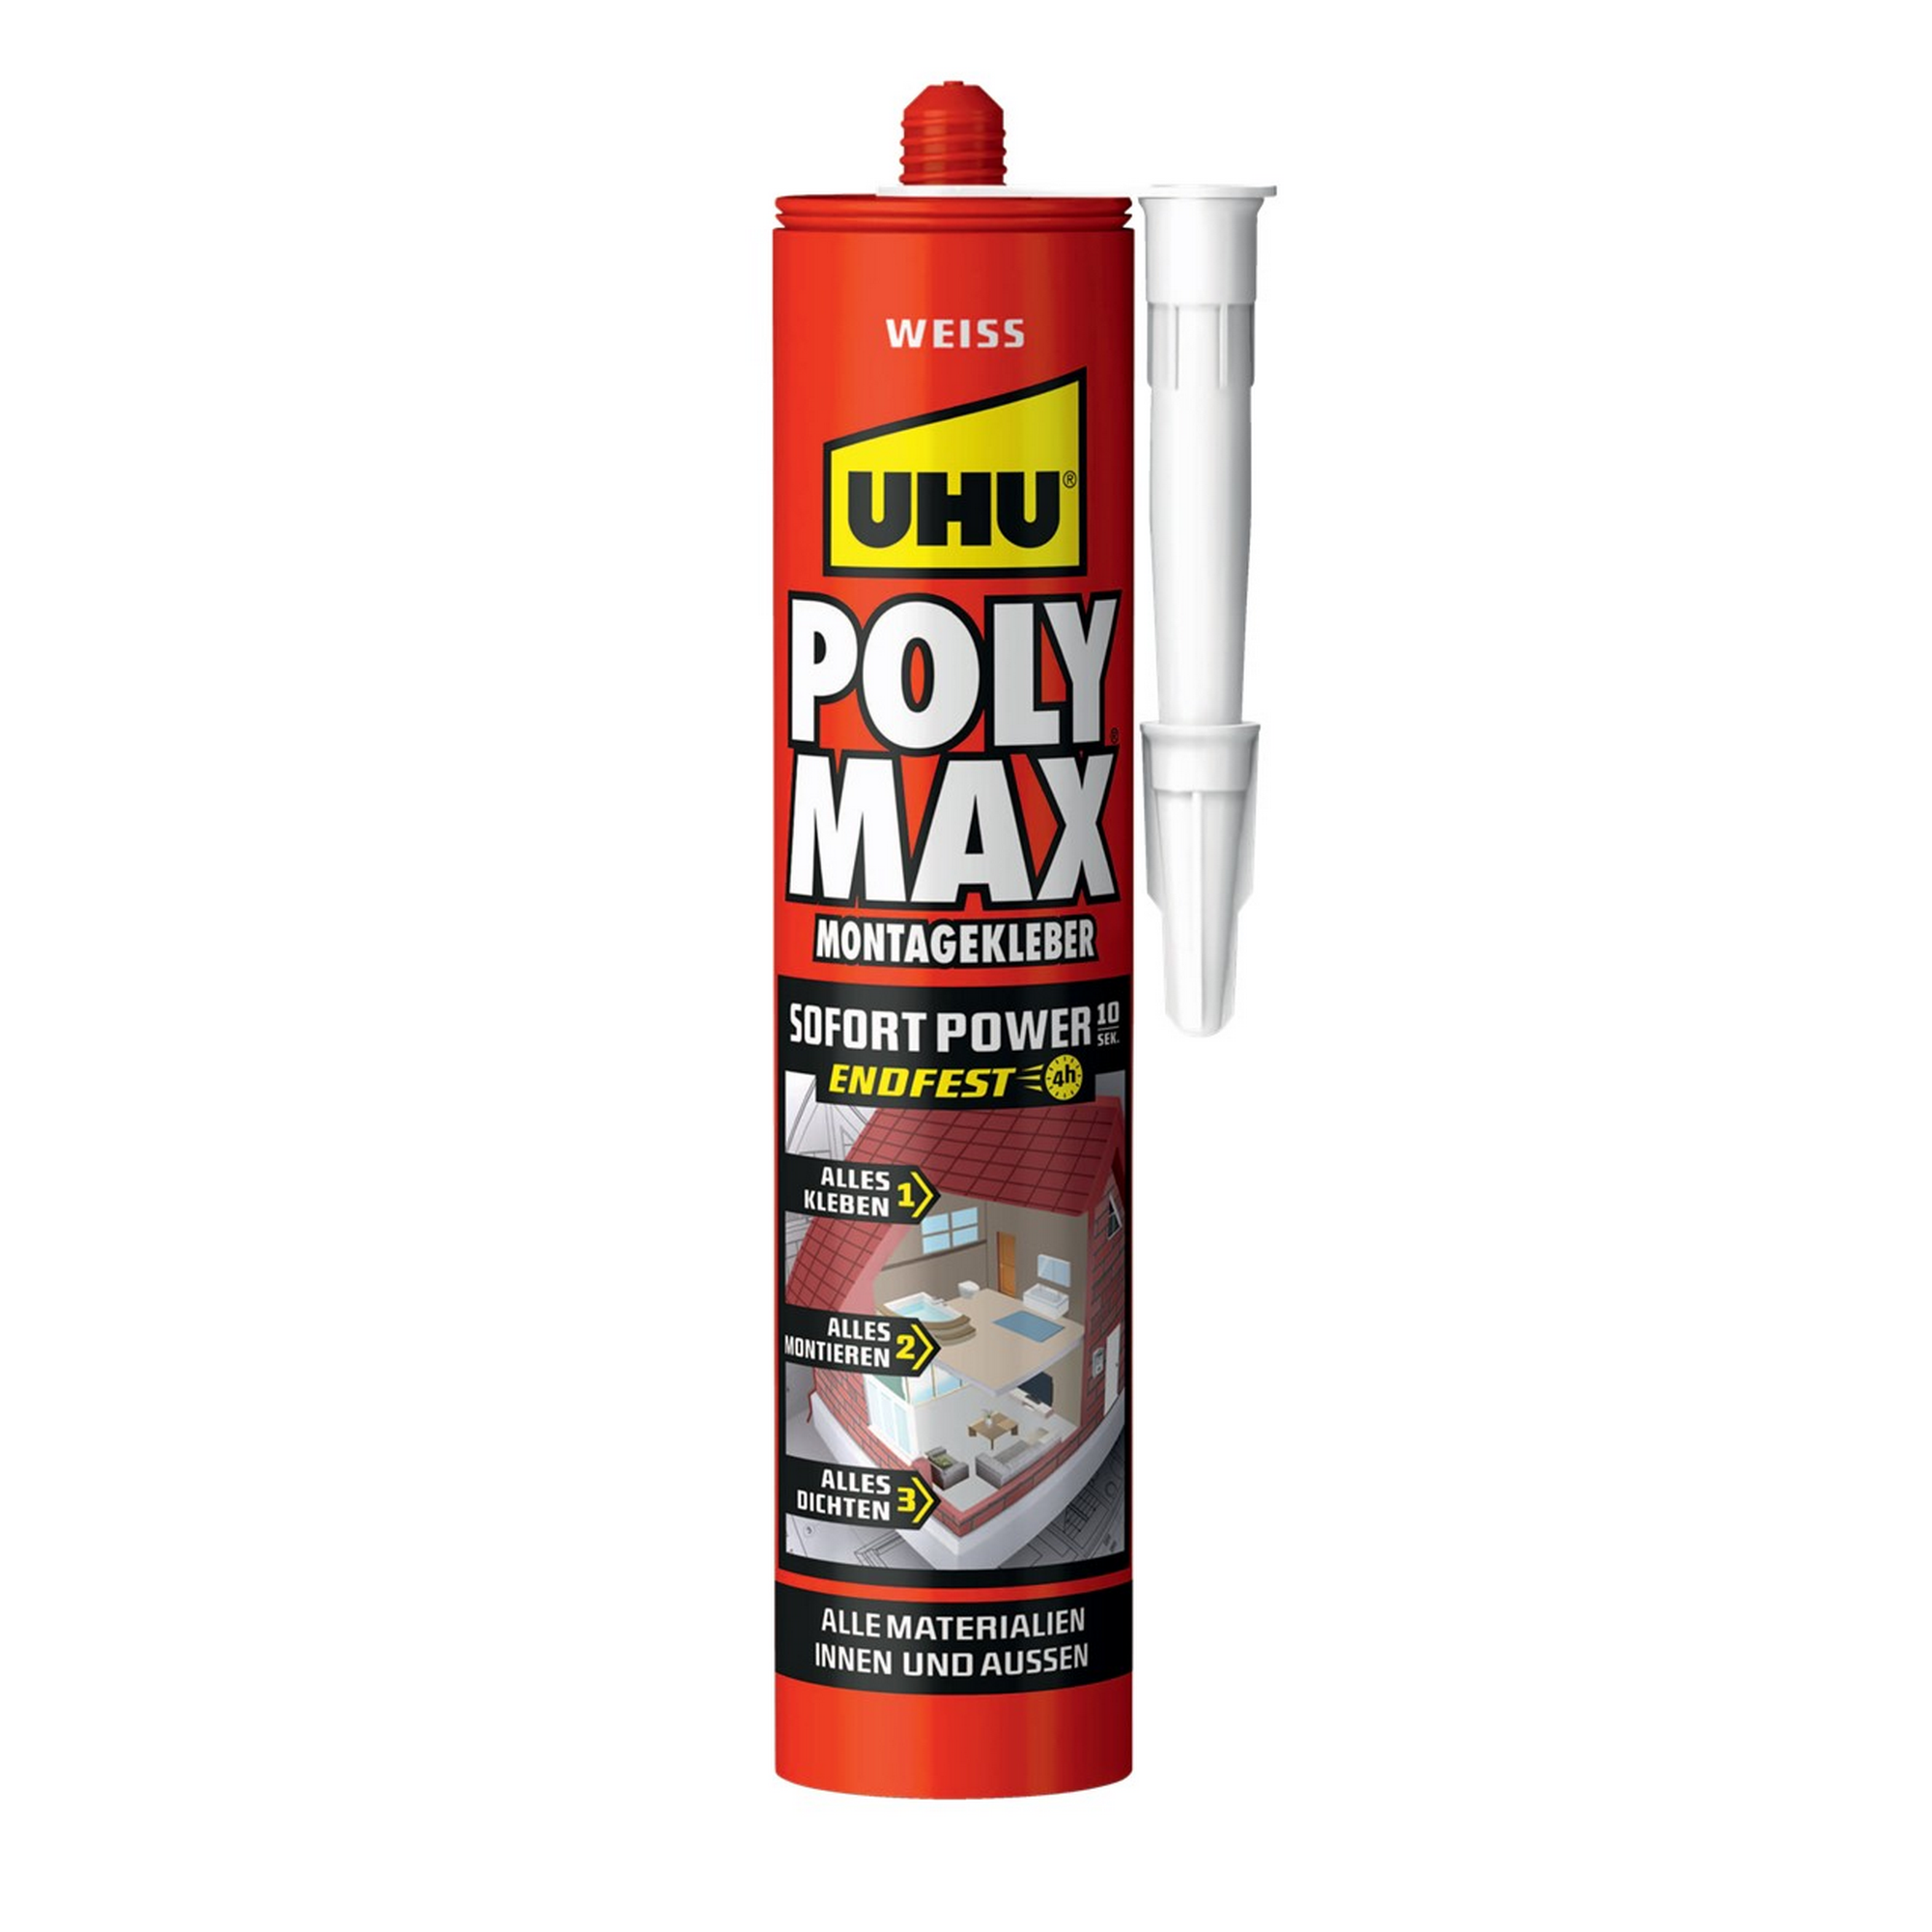 Montagekleber 'POLY MAX Sofort Power' weiß 425 g + product picture